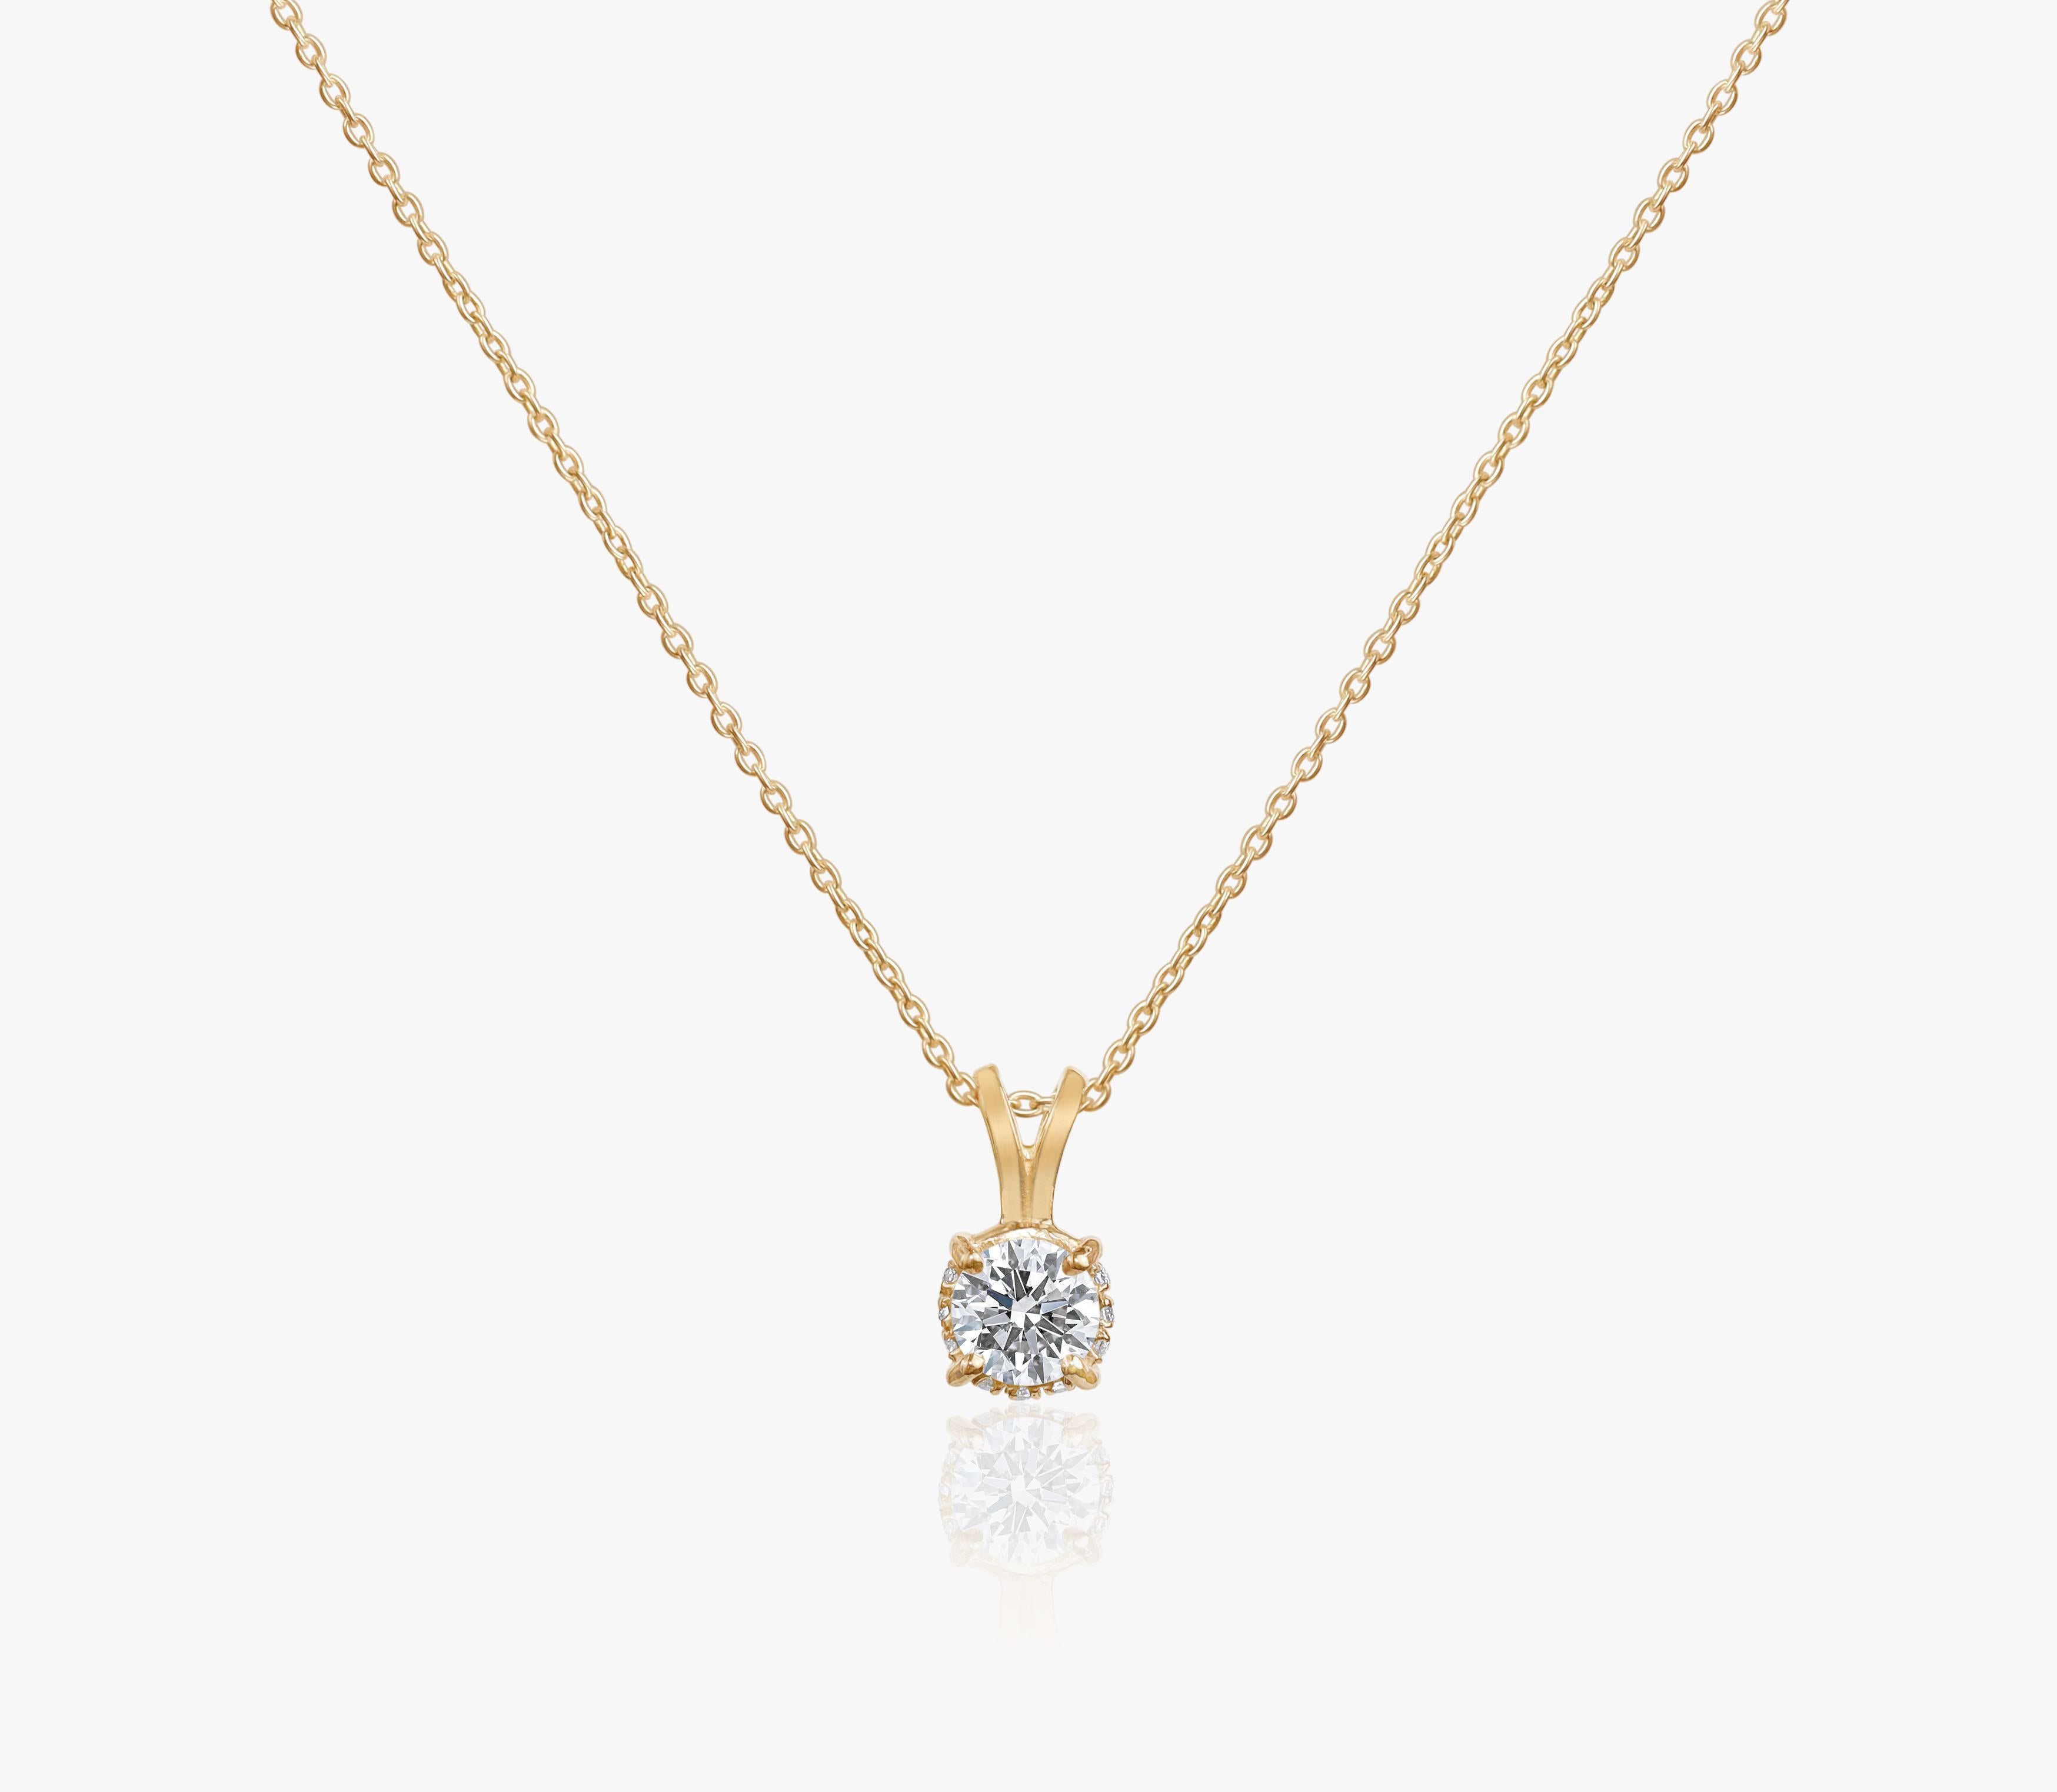 GIA Report Certified 1 Carat D Colorless IF Round Cut Diamond Pendant Necklace

Available in 18k Yellow gold.

Same design can be made also with other custom gemstones per request.

Product details:

- Solid gold

- Main stone - approx. 1 carat GIA